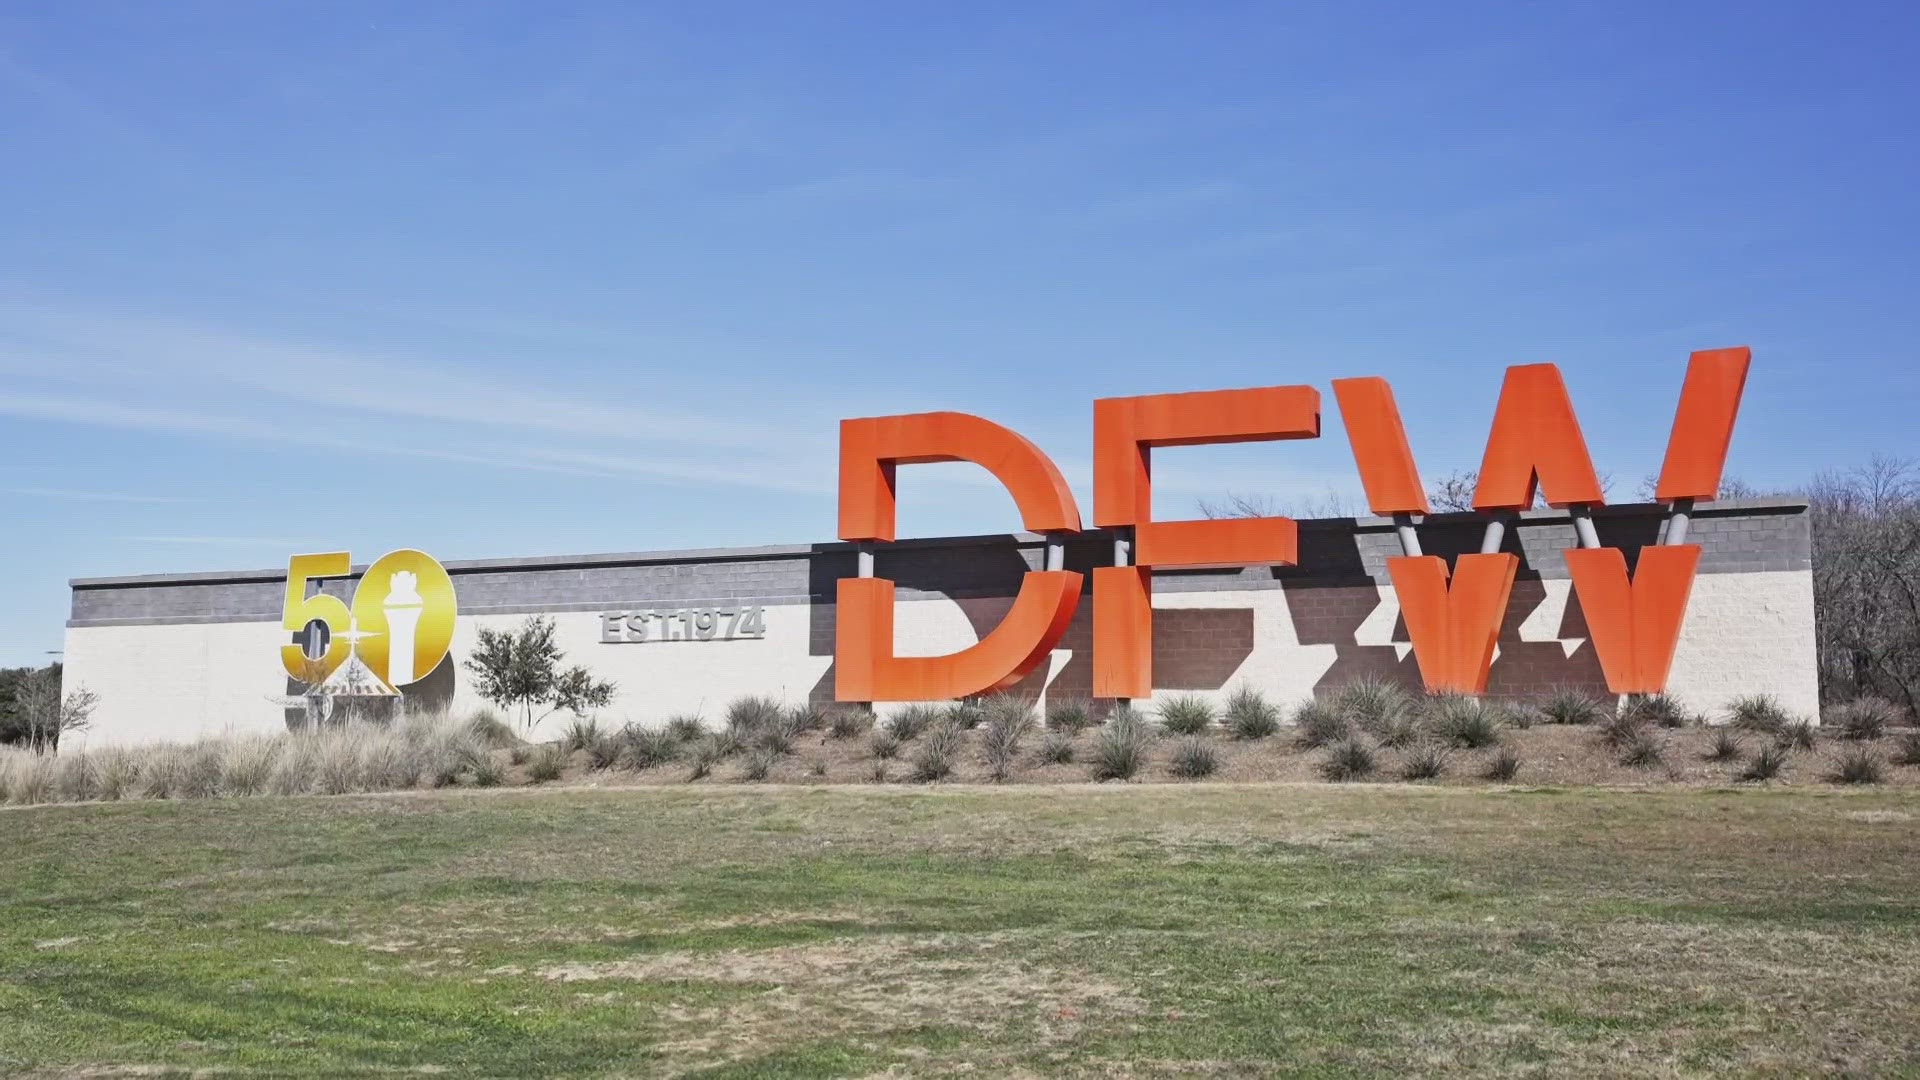 DFW Airport celebrated with a flash mob, spruced up signs, and more.